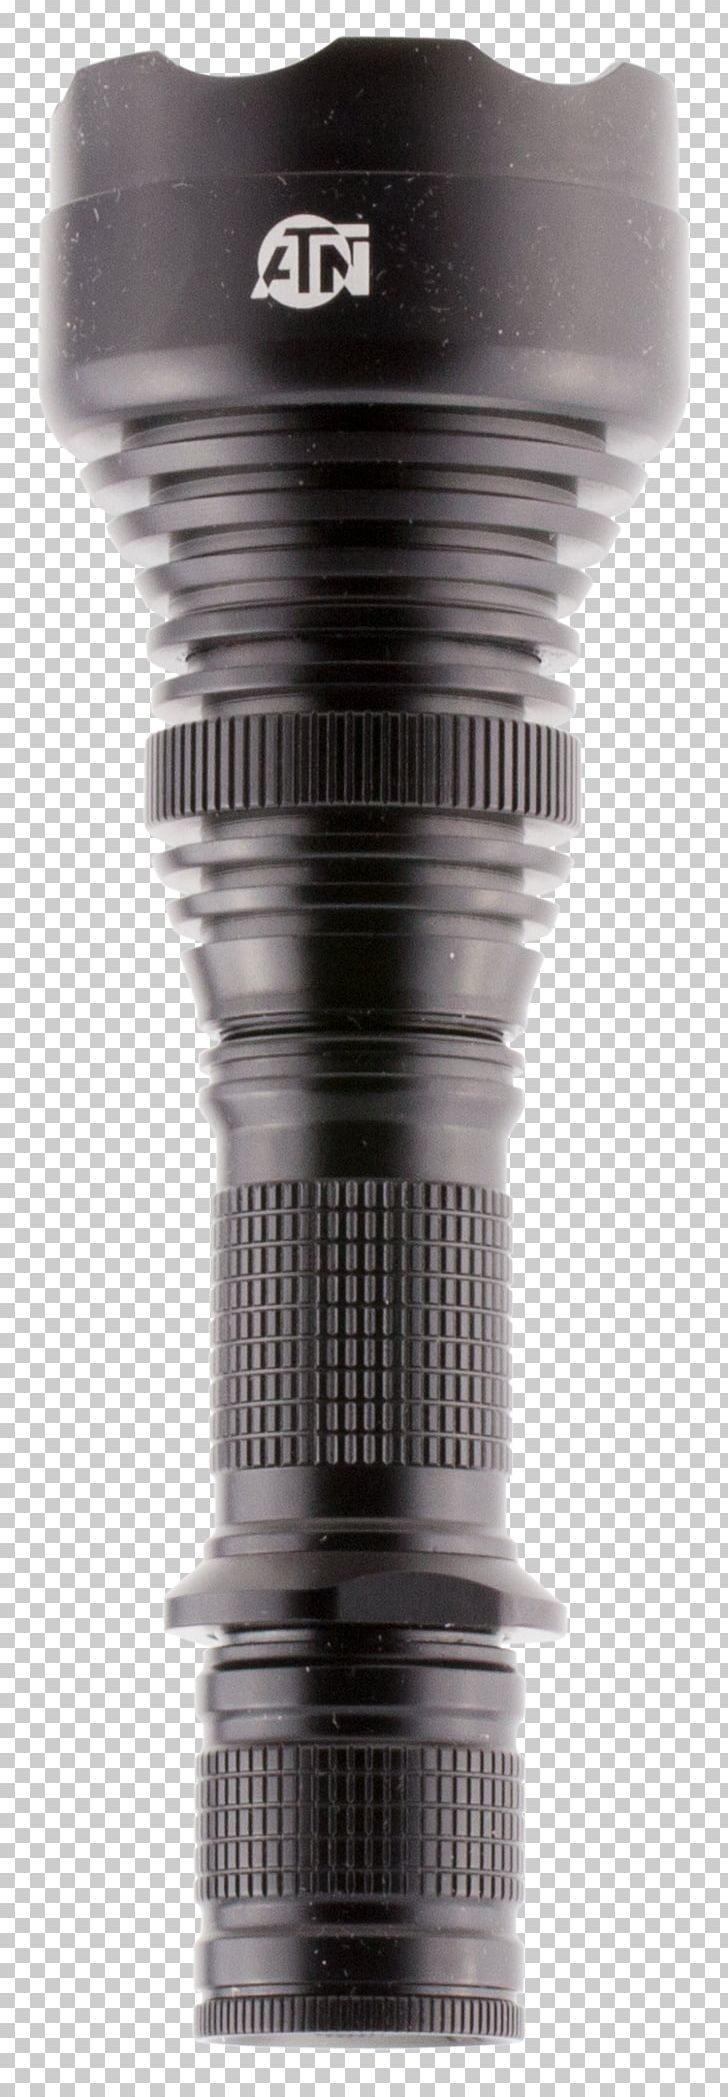 United States Camera Lens American Technologies Network Corporation Telescopic Sight Binoculars PNG, Clipart, Binoculars, Camera Lens, Eyepiece, Hardware, Infrared Free PNG Download